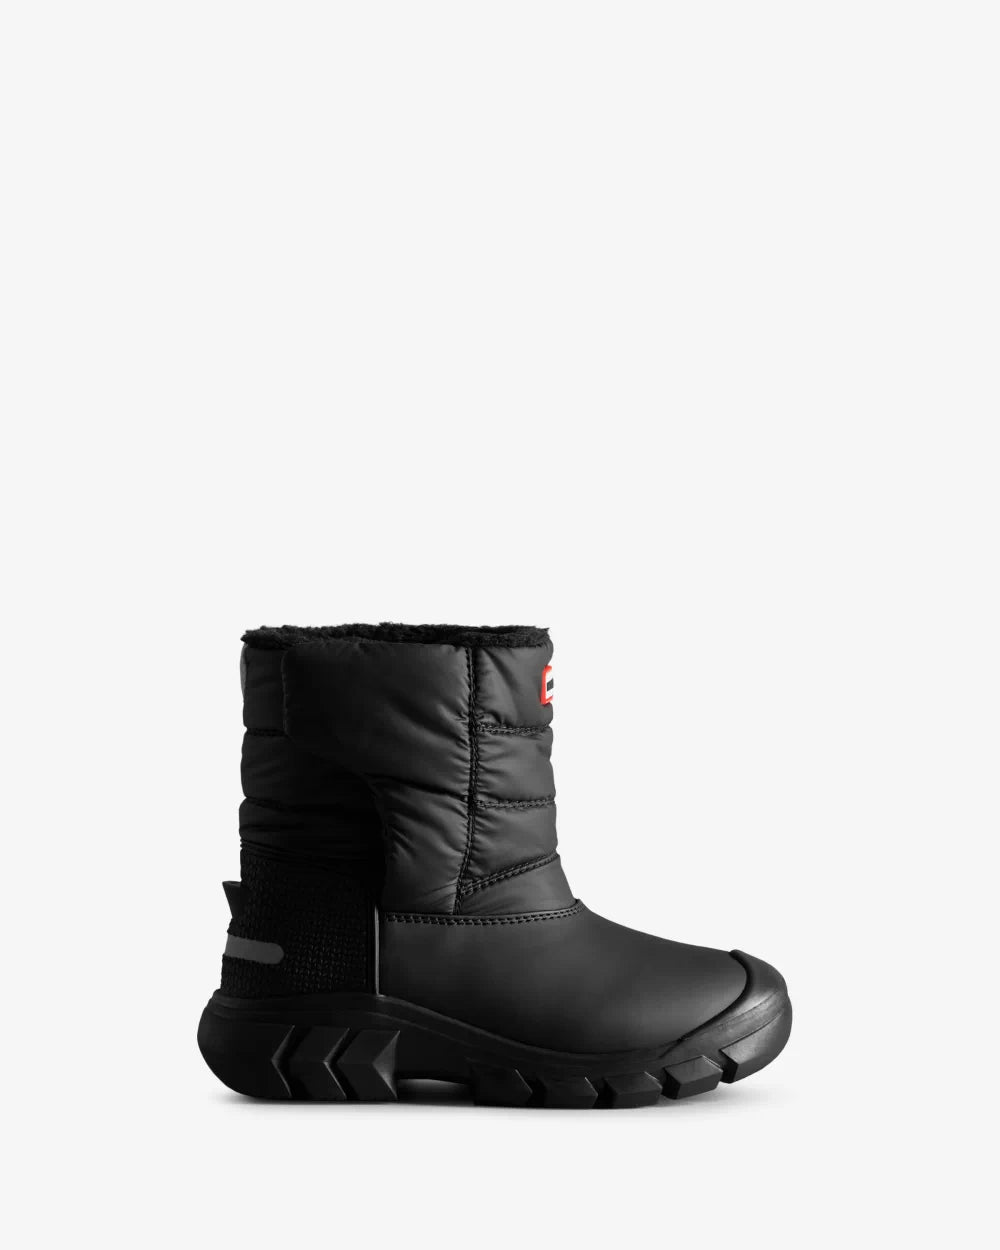 Big Kids Snow Boot - The Shoe CollectiveHunter Boots